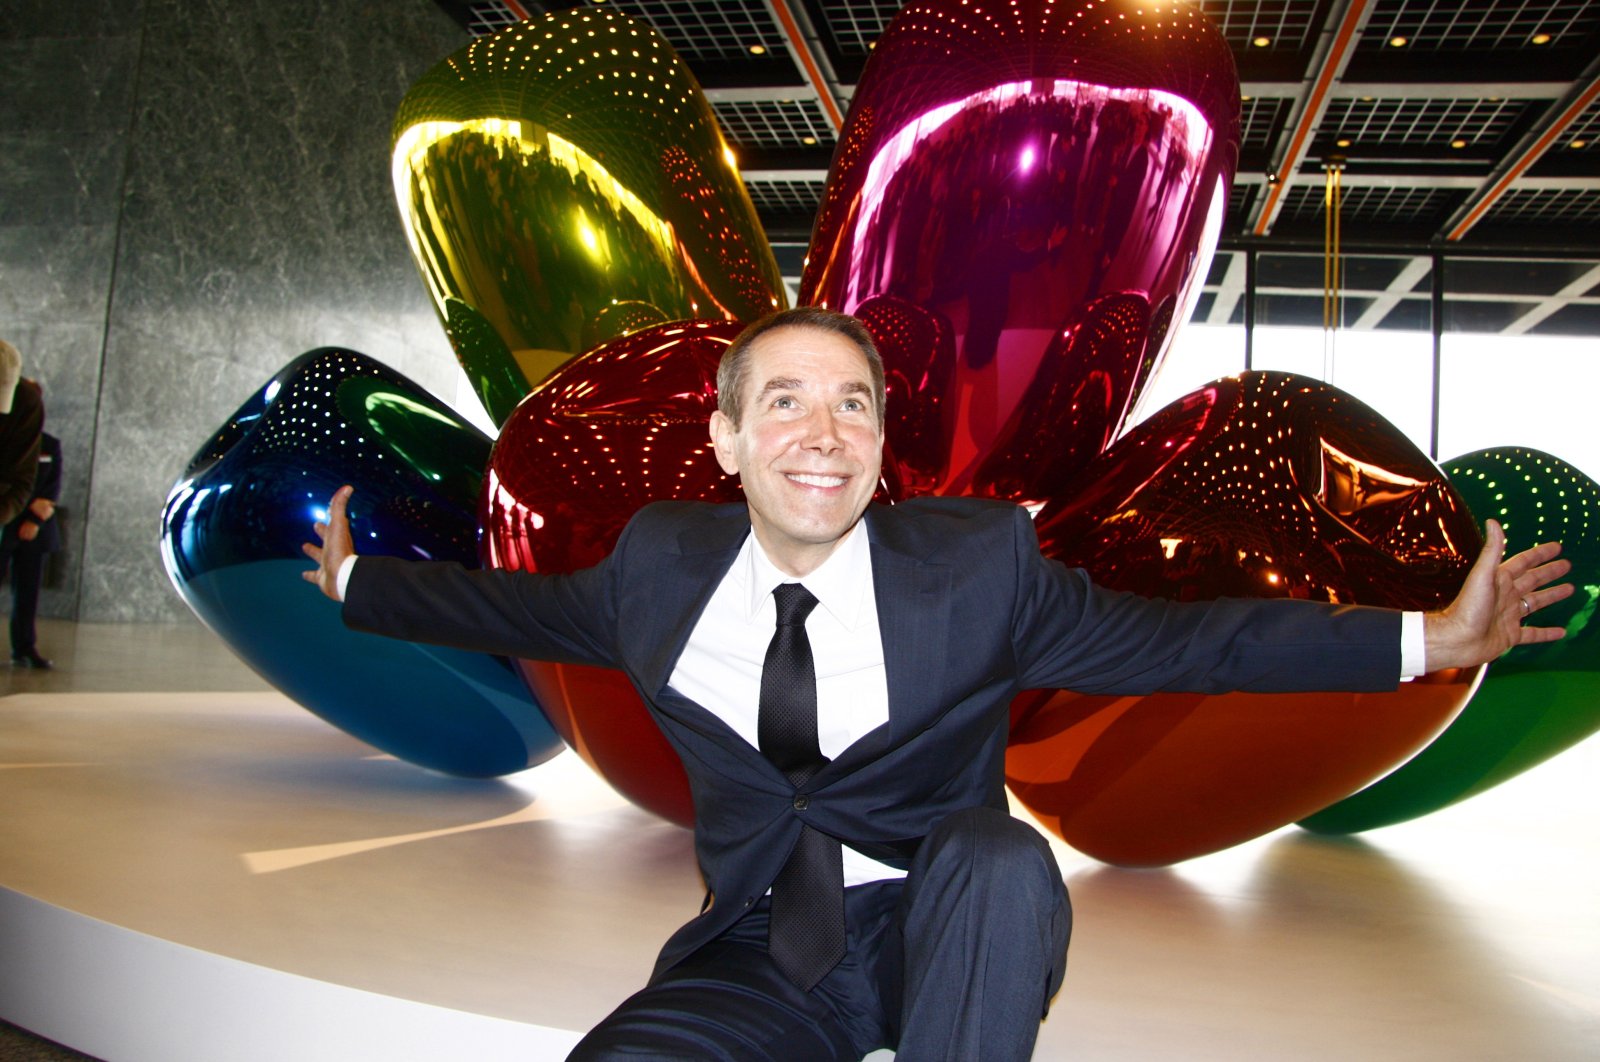 Artist Jeff Koons in front of the sculpture &quot;Tulips&quot; at the presentation of his solo exhibition titled &quot;Jeff Koons. Celebration,&quot; Neue Nationalgalerie, Berlin, Germany, Oct. 29, 2008. (Shutterstock Photo)